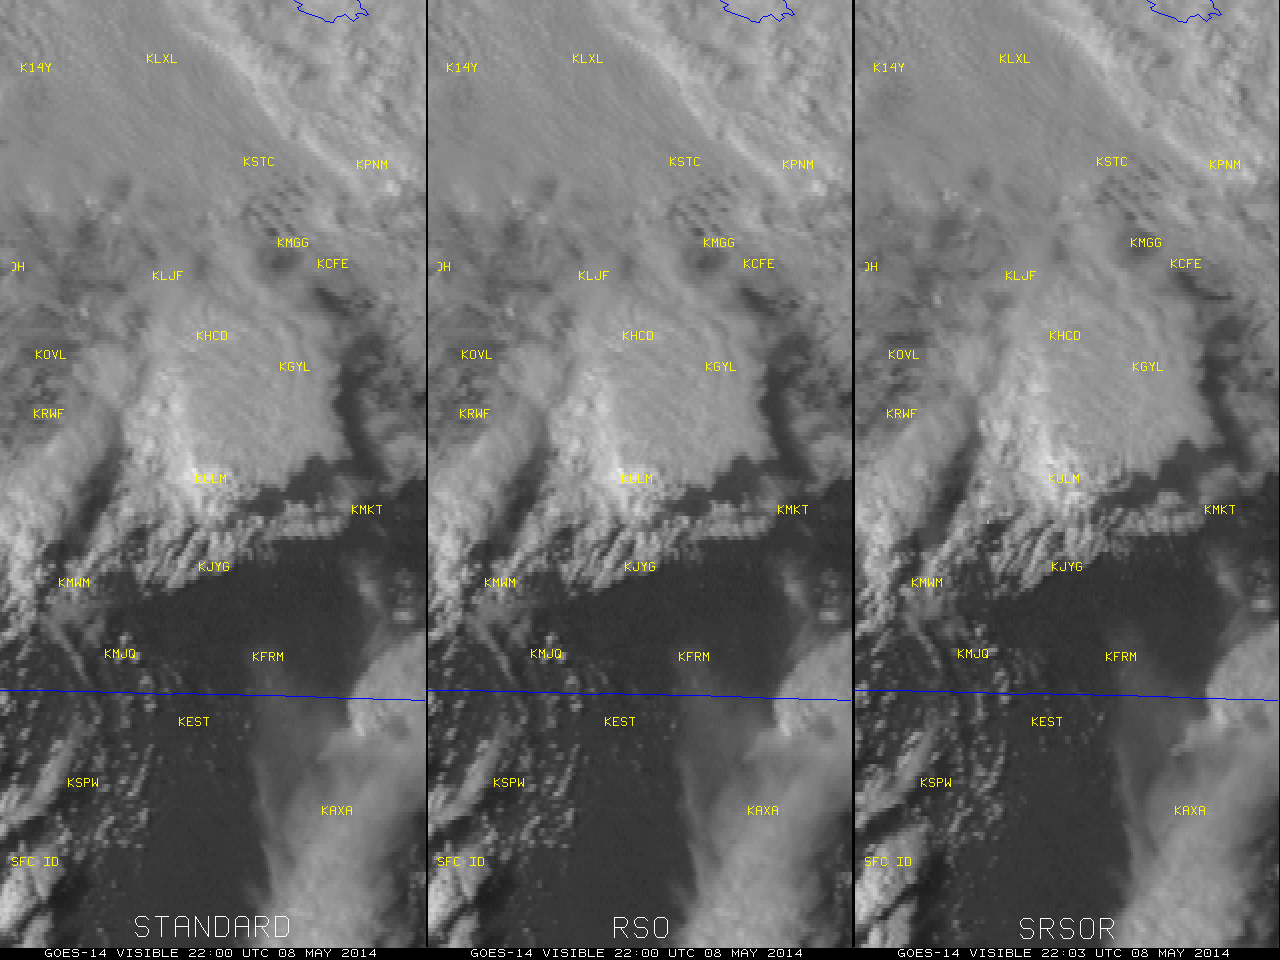 GOES-13 0.63 um visible channel images: Standard 15-minute interval (left), RSO (center), and SRSOR (right) [click image to play animation]